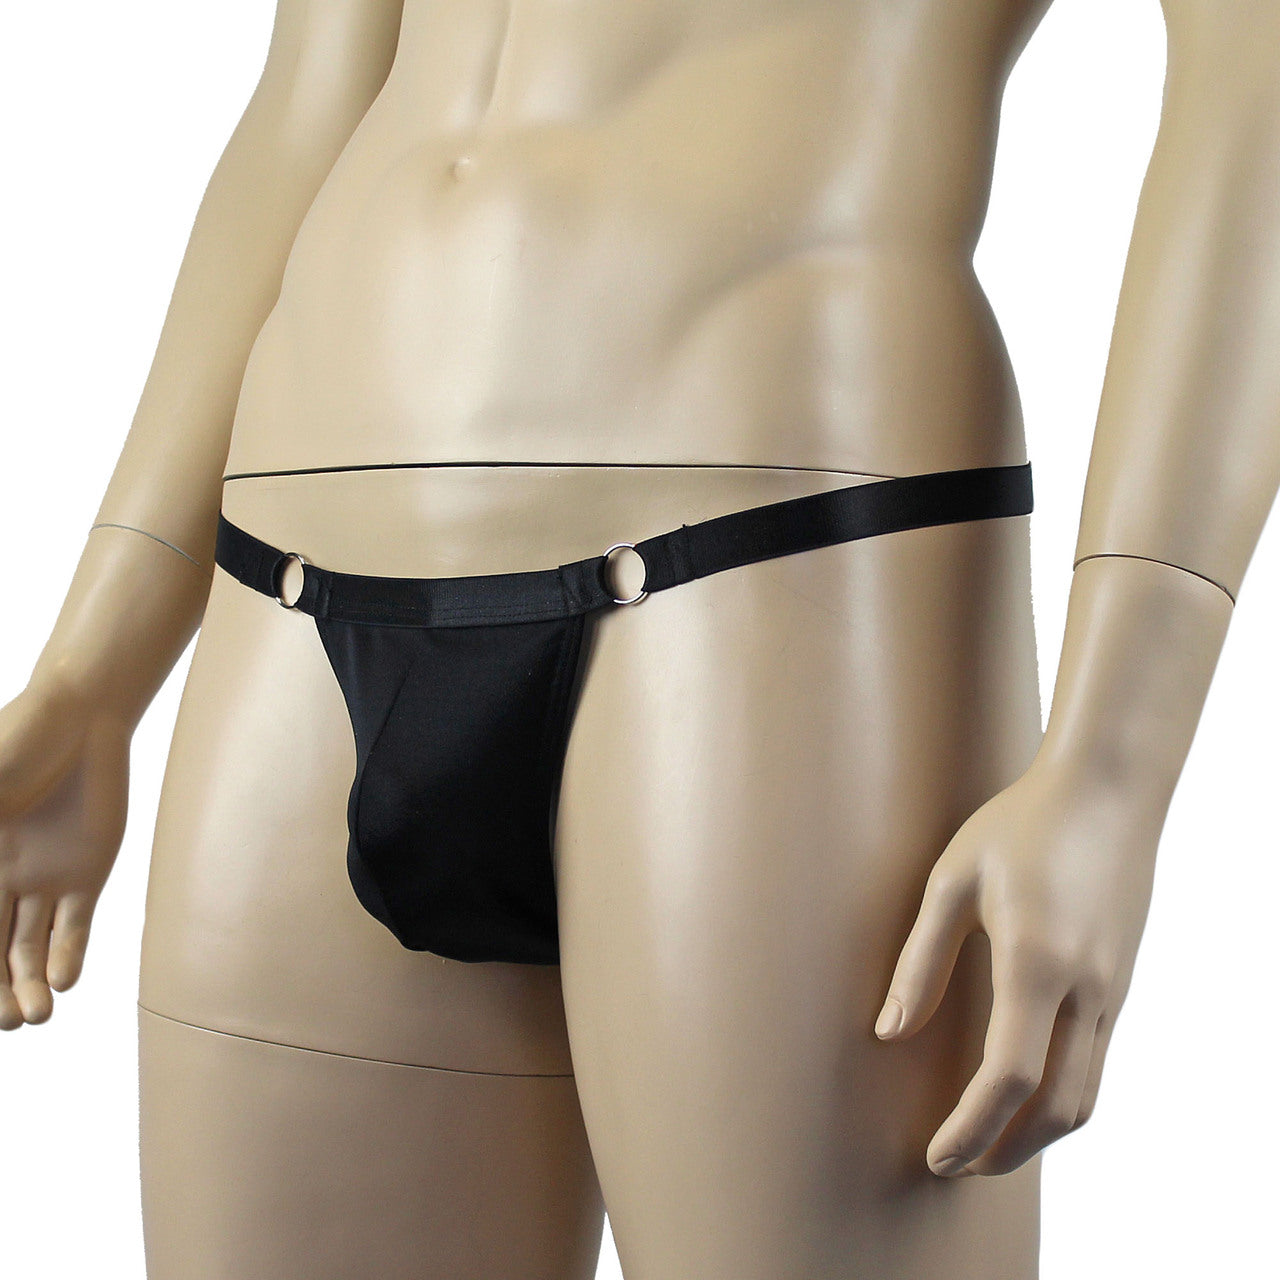 Male Spandex Thong with Ring Sides and Adjustable Strap Black